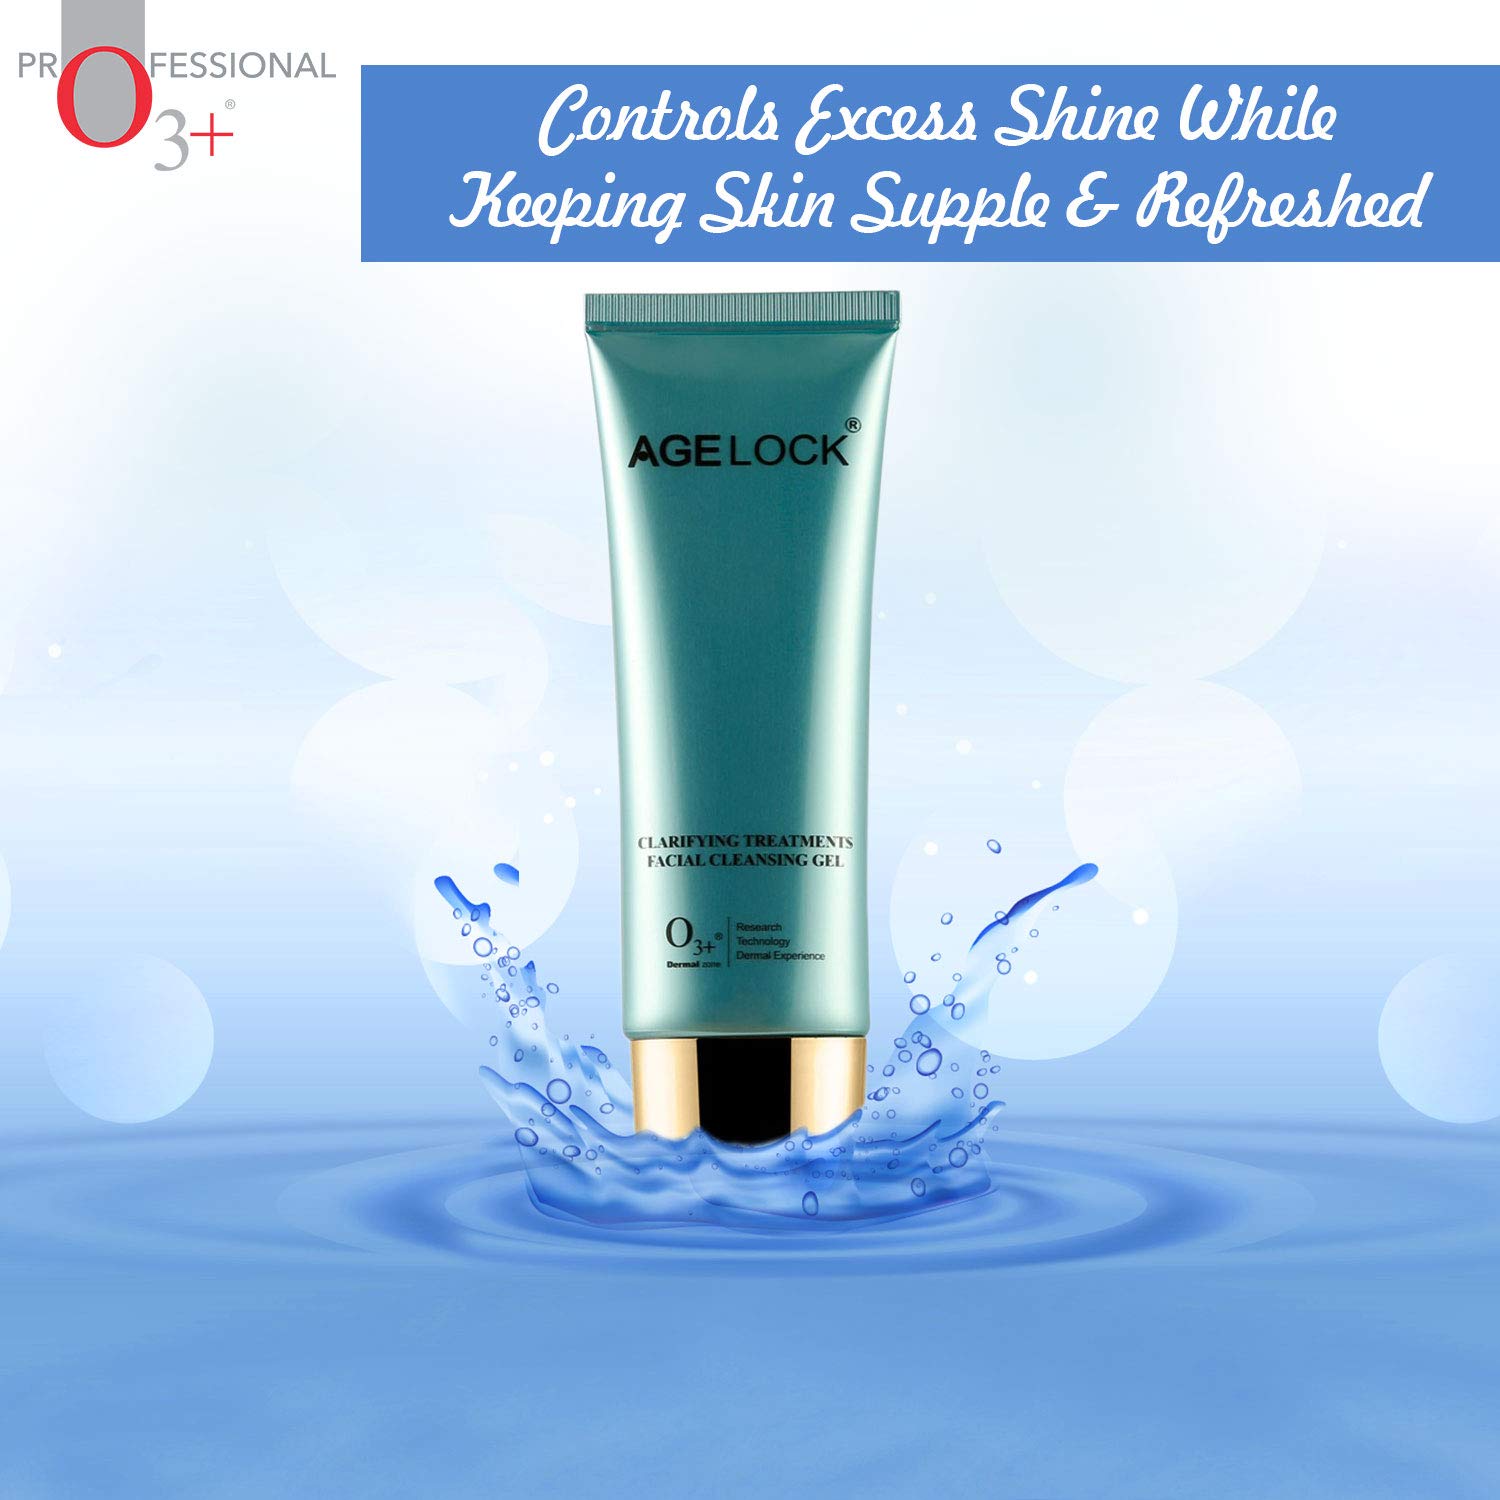 O3+ Agelock Clarifying Treatments Facial Cleansing Gel, 75 g  from O3+